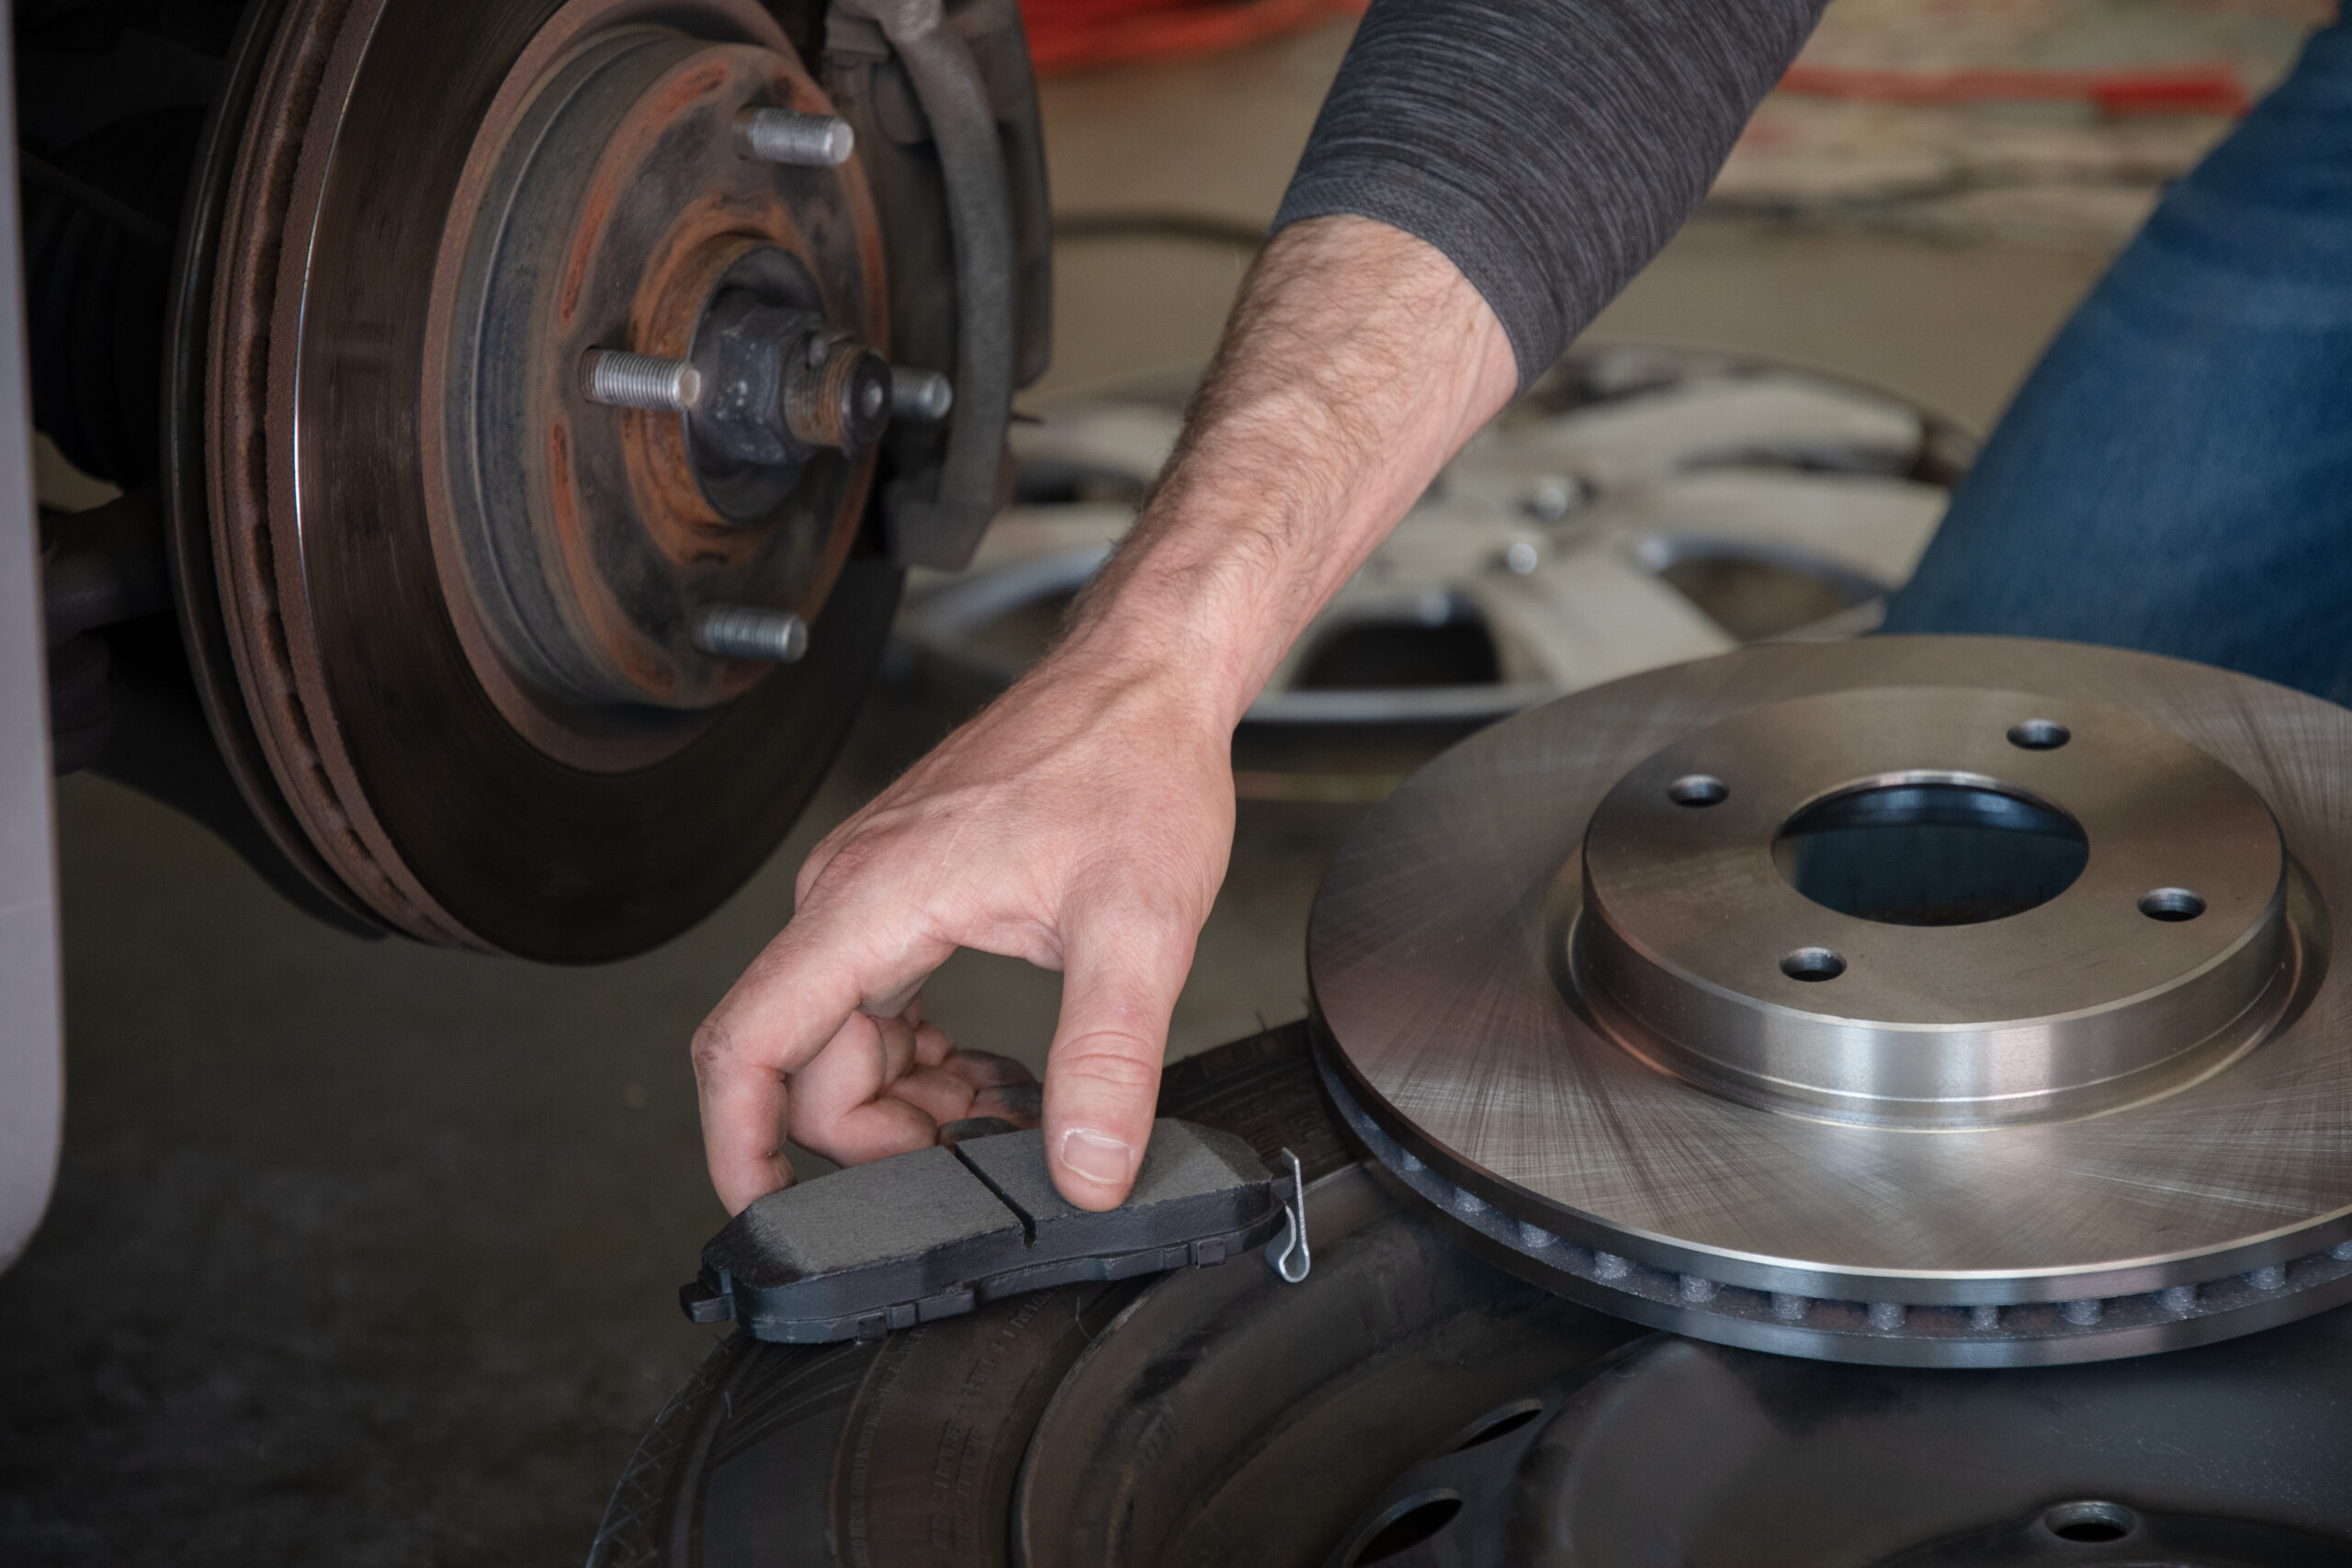 How Much Do Brake Pads and Brake Discs Cost?